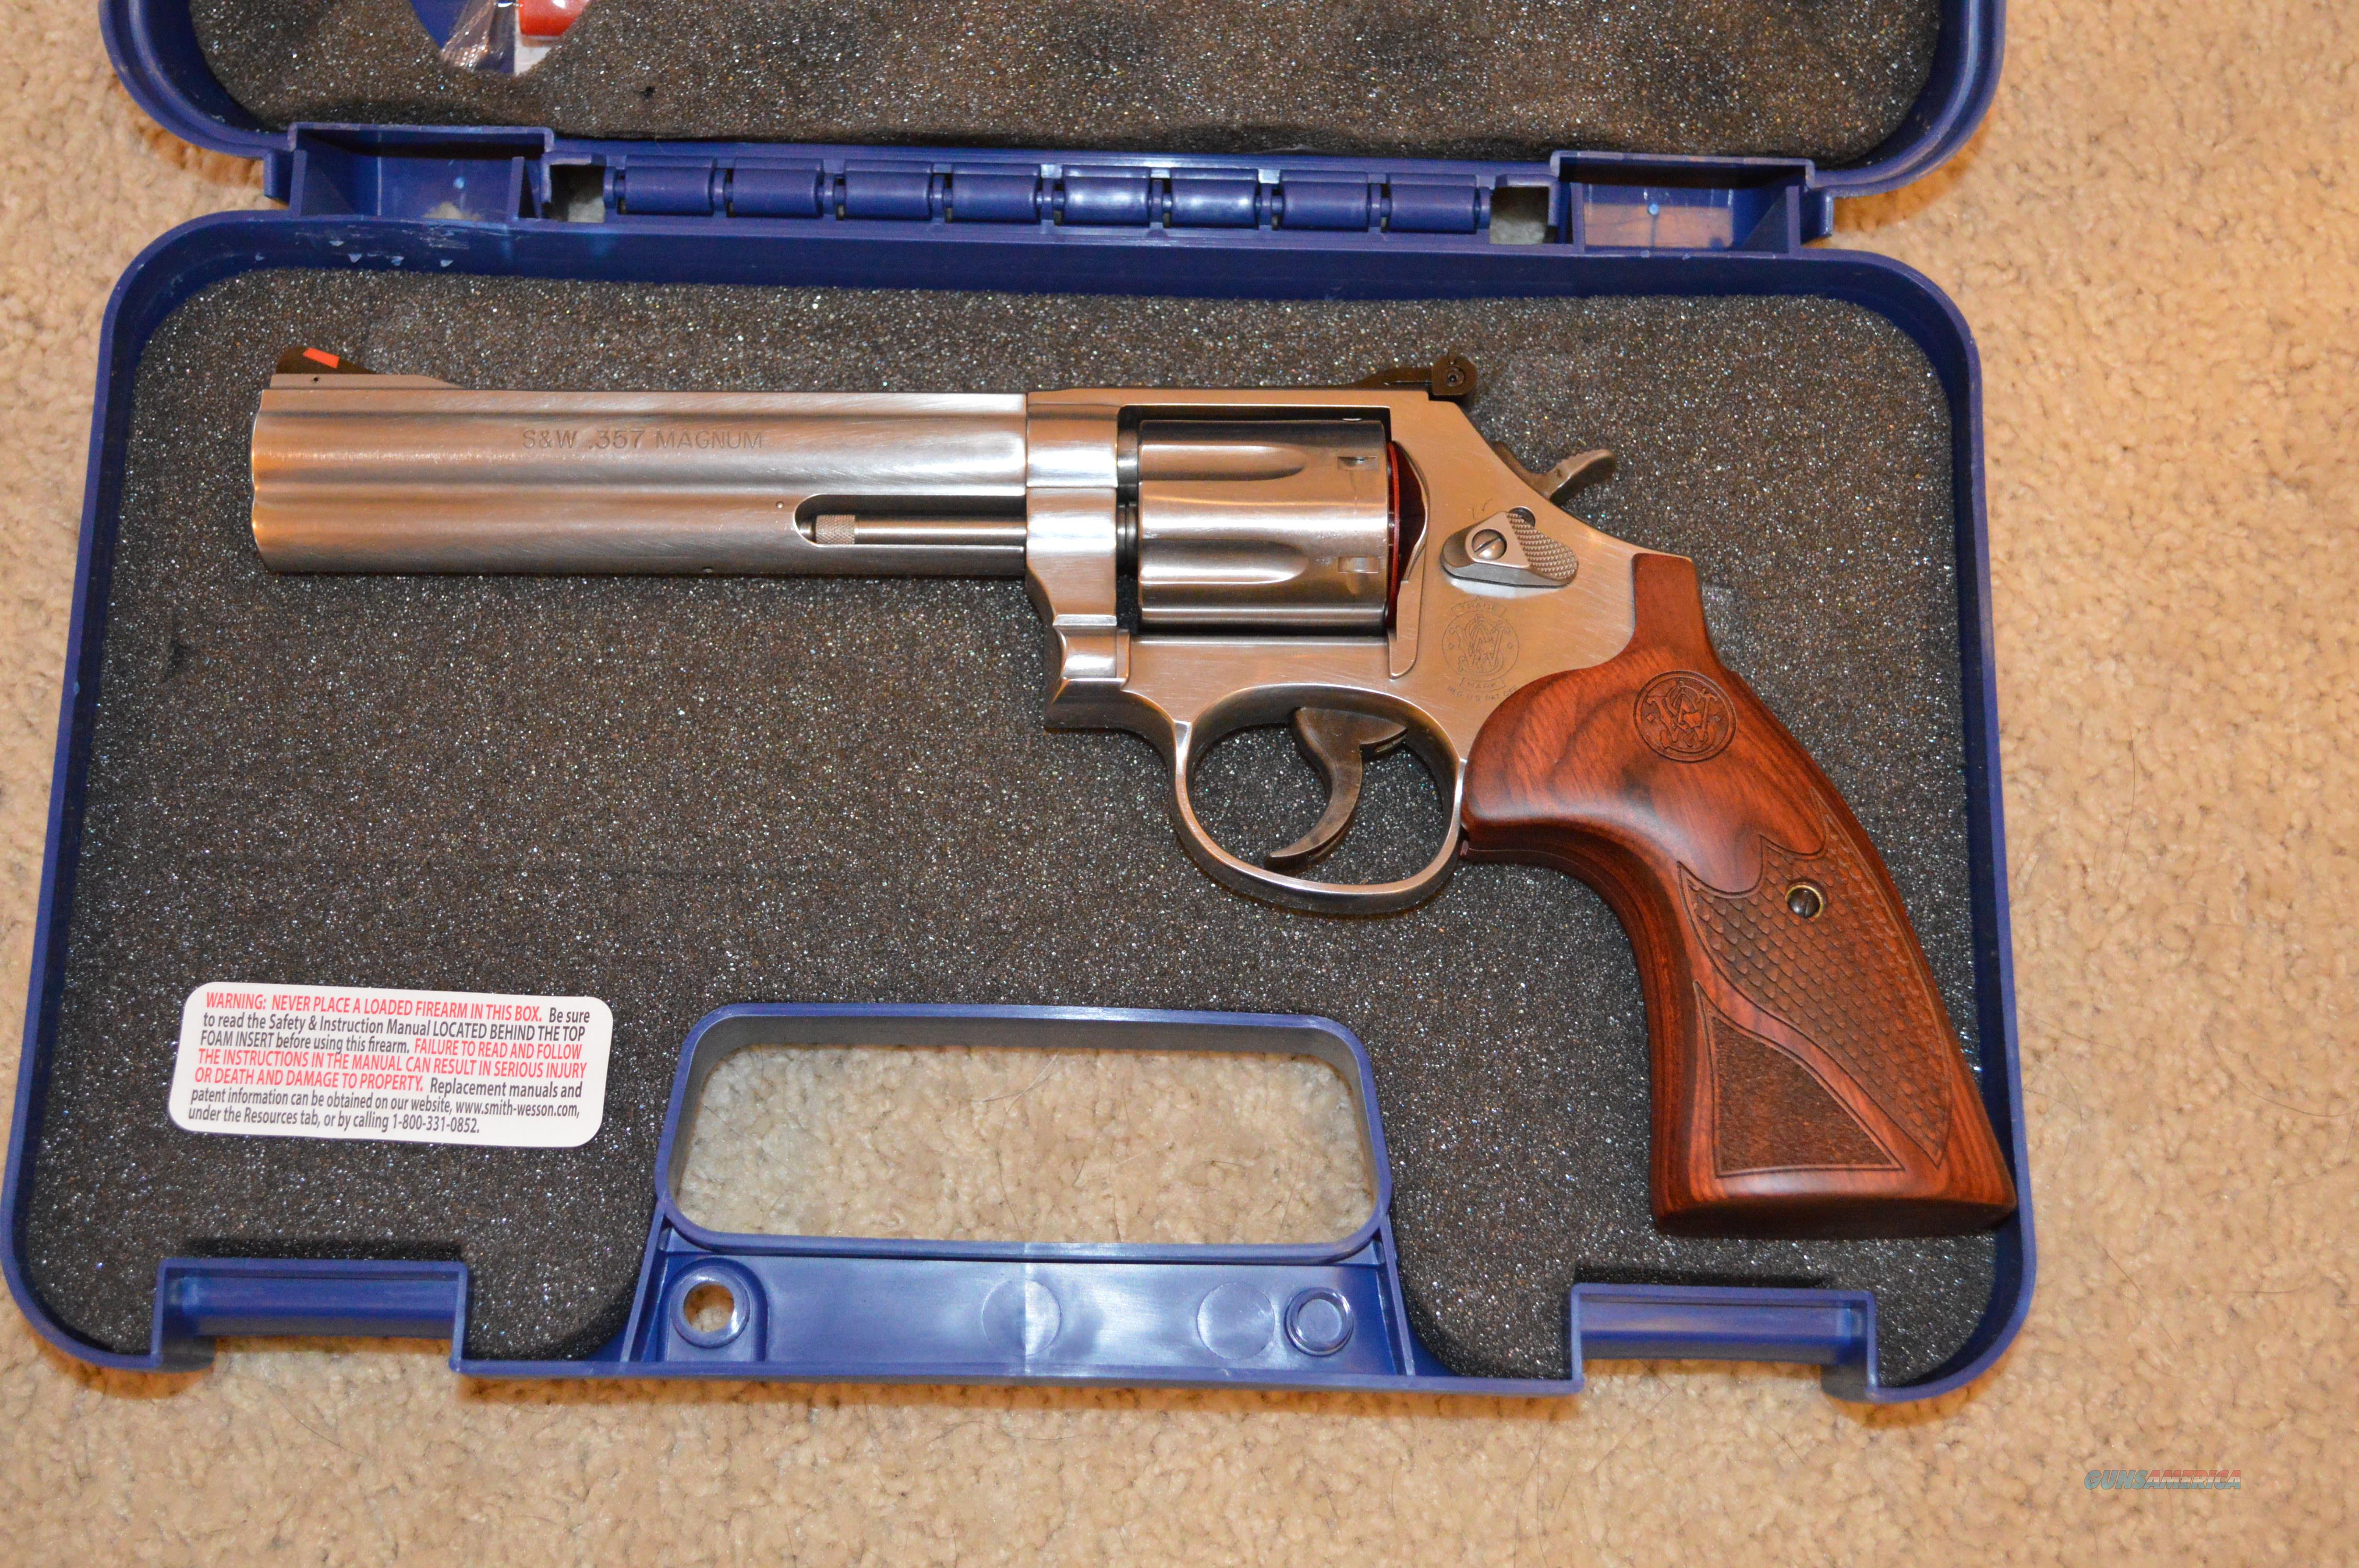 smith-and-wesson-686-plus-deluxe-for-sale-at-gunsamerica-999173184